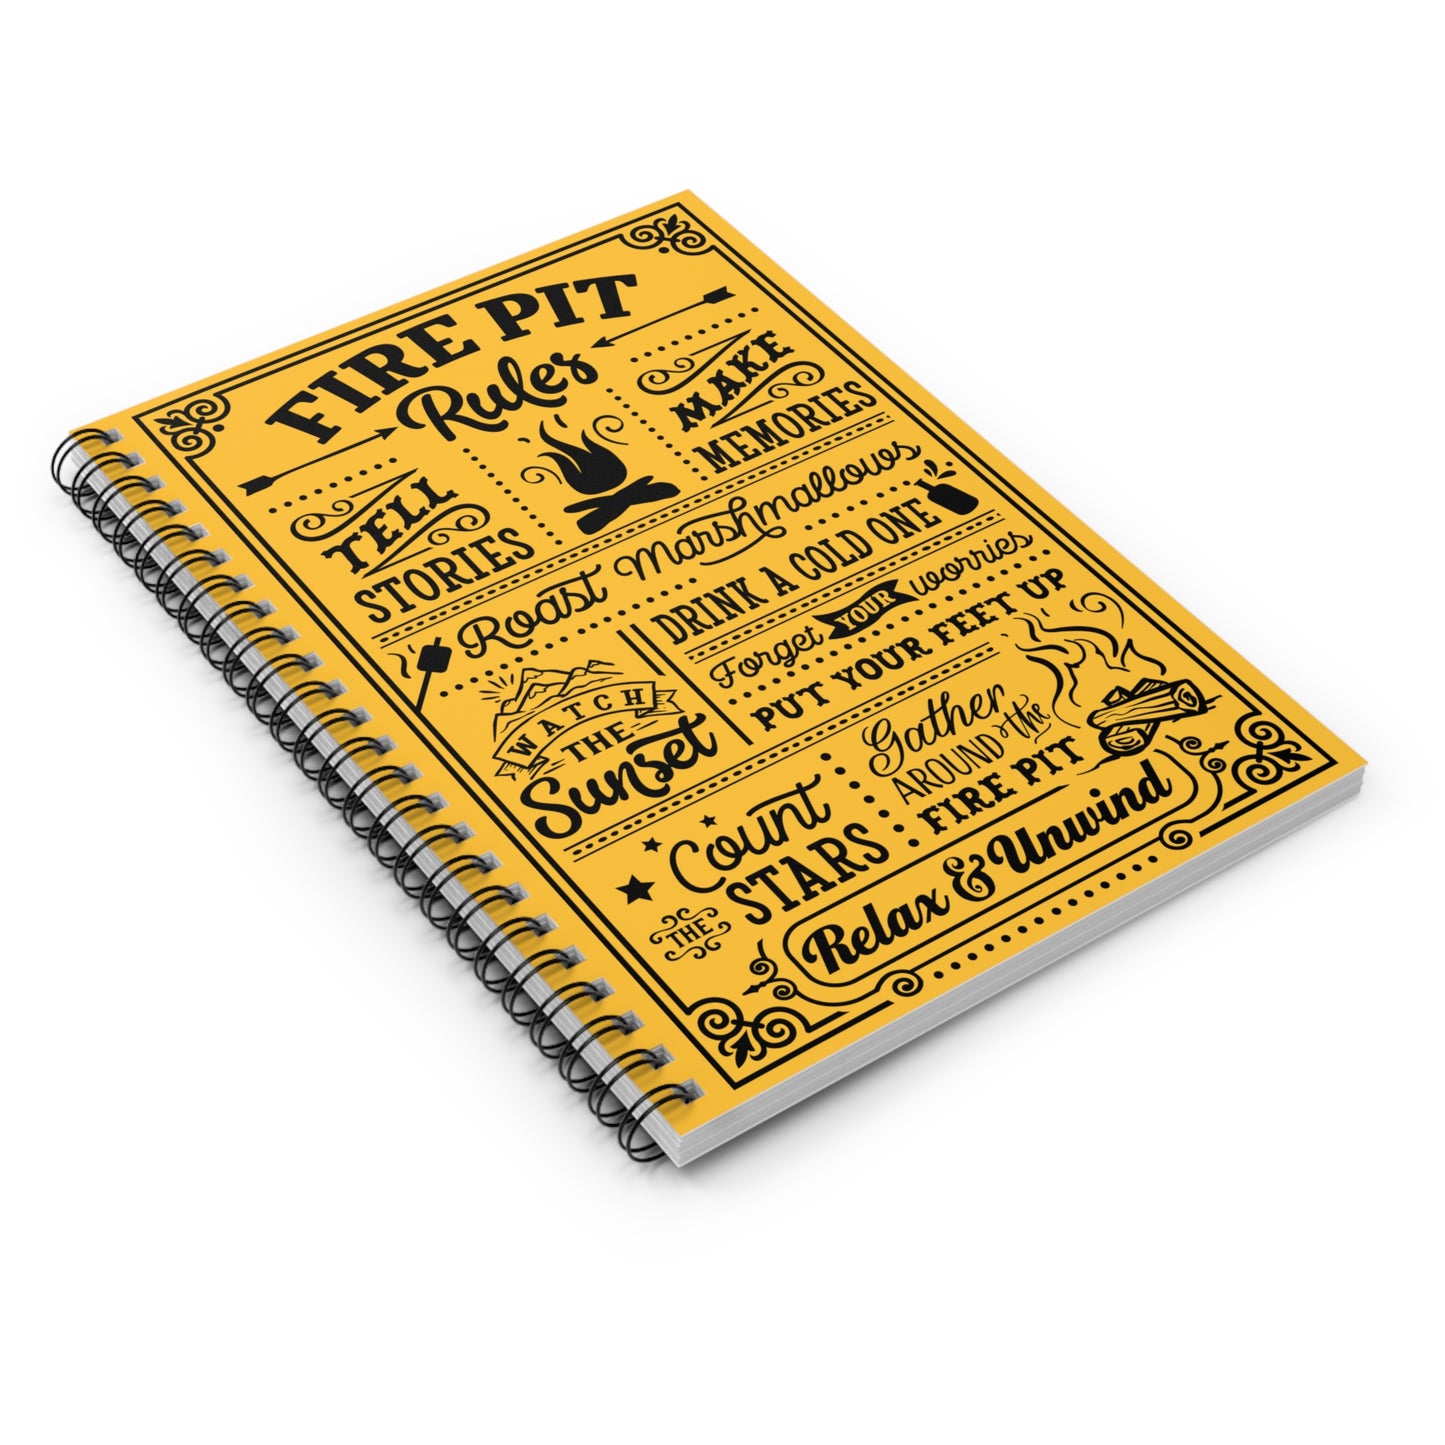 Fire Pit Rules: Spiral Notebook - Log Books - Journals - Diaries - and More Custom Printed by TheGlassyLass.com